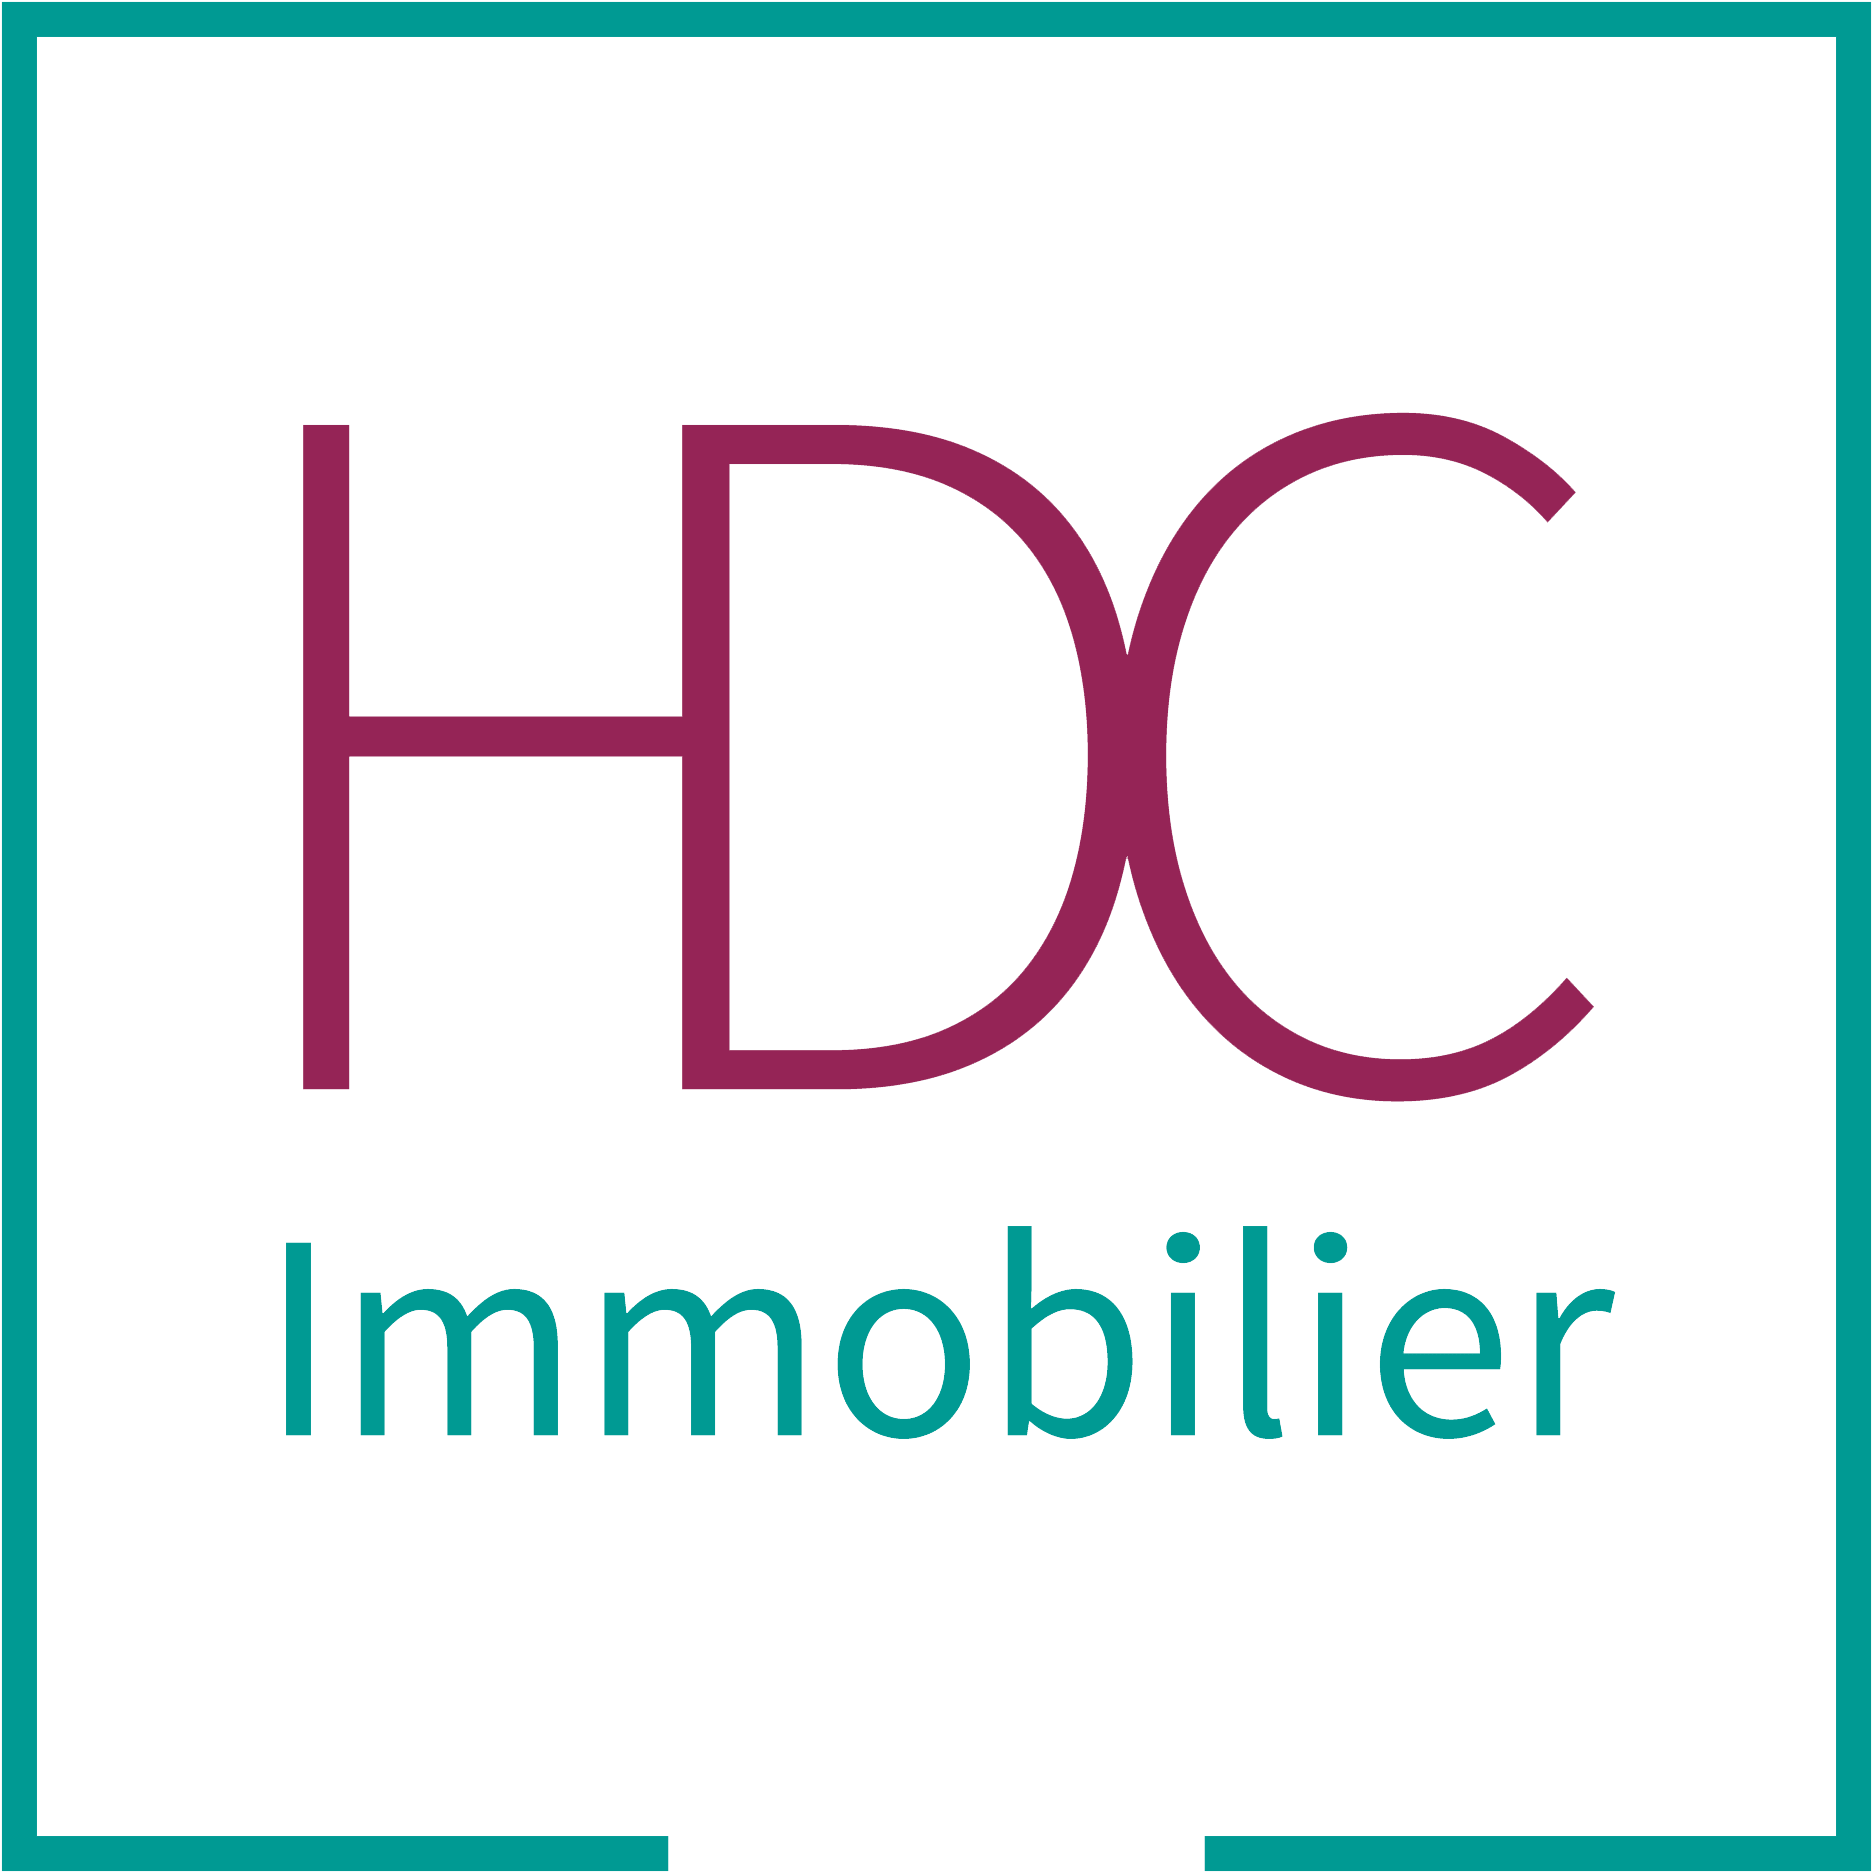 Download Création Logo Immobilier - Graphic Design PNG Image with No ...